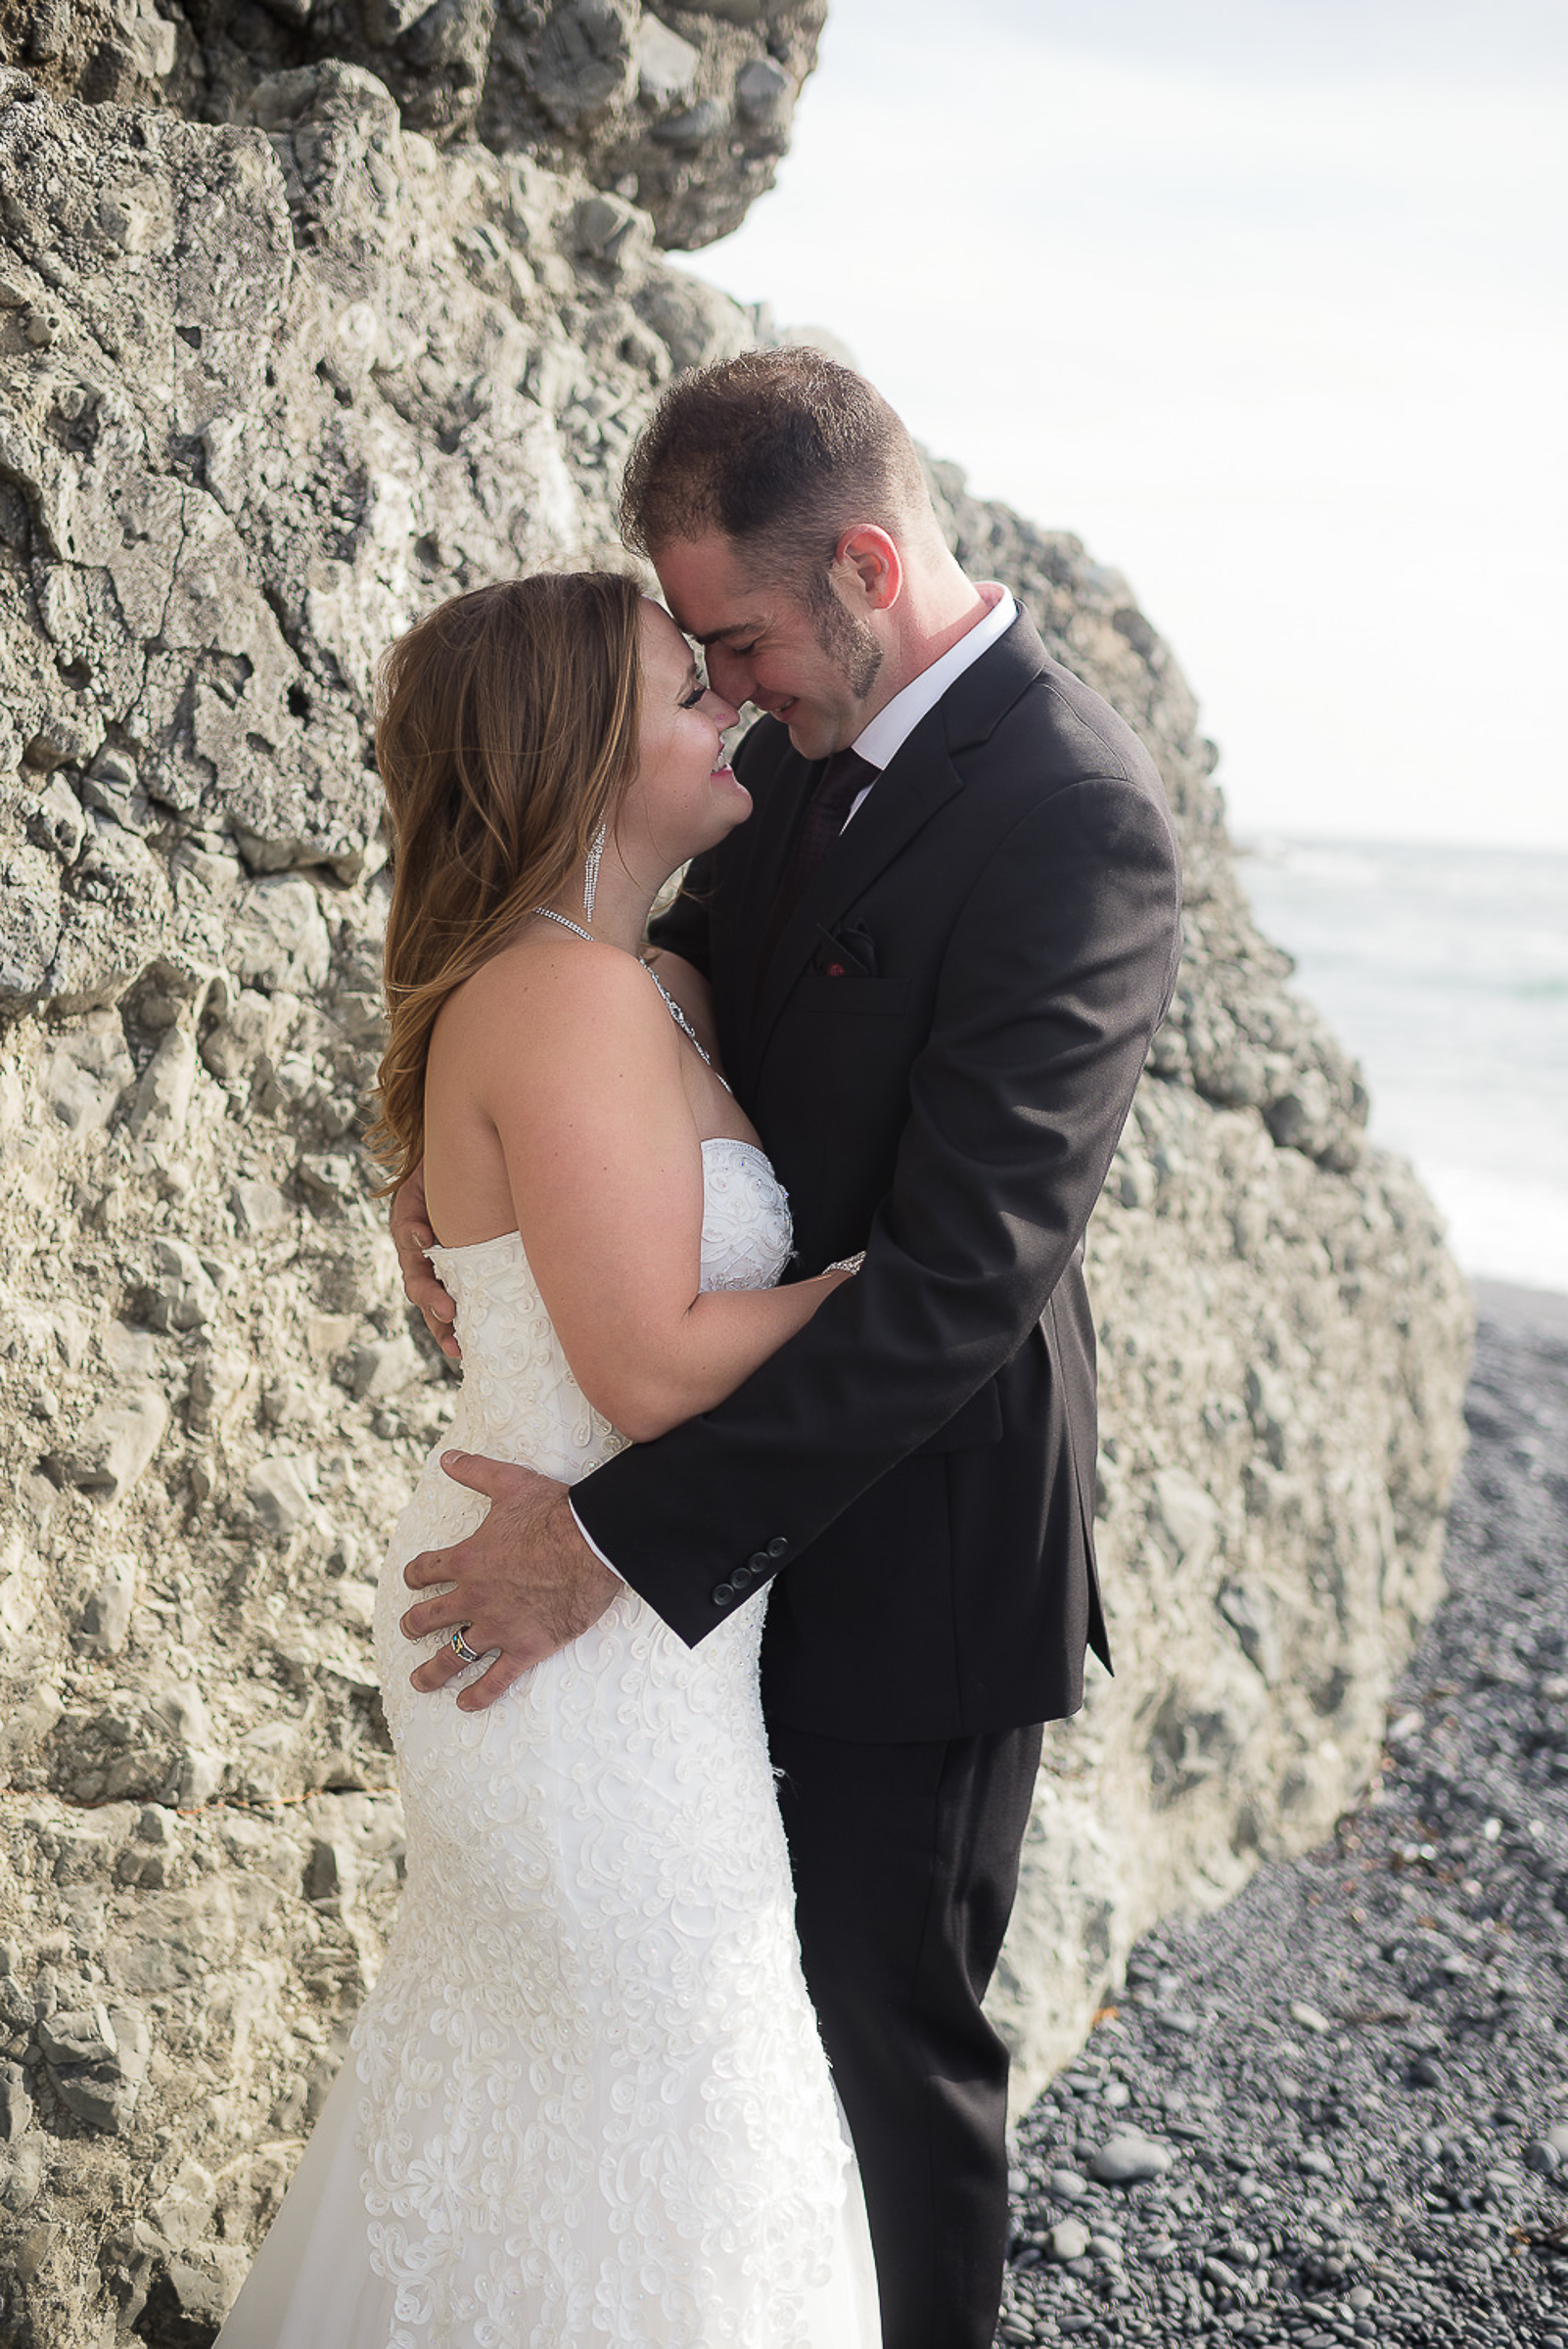  John and Danielle's Intimate Destination Wedding at Little Black Sands Beach in Shelter Cove  